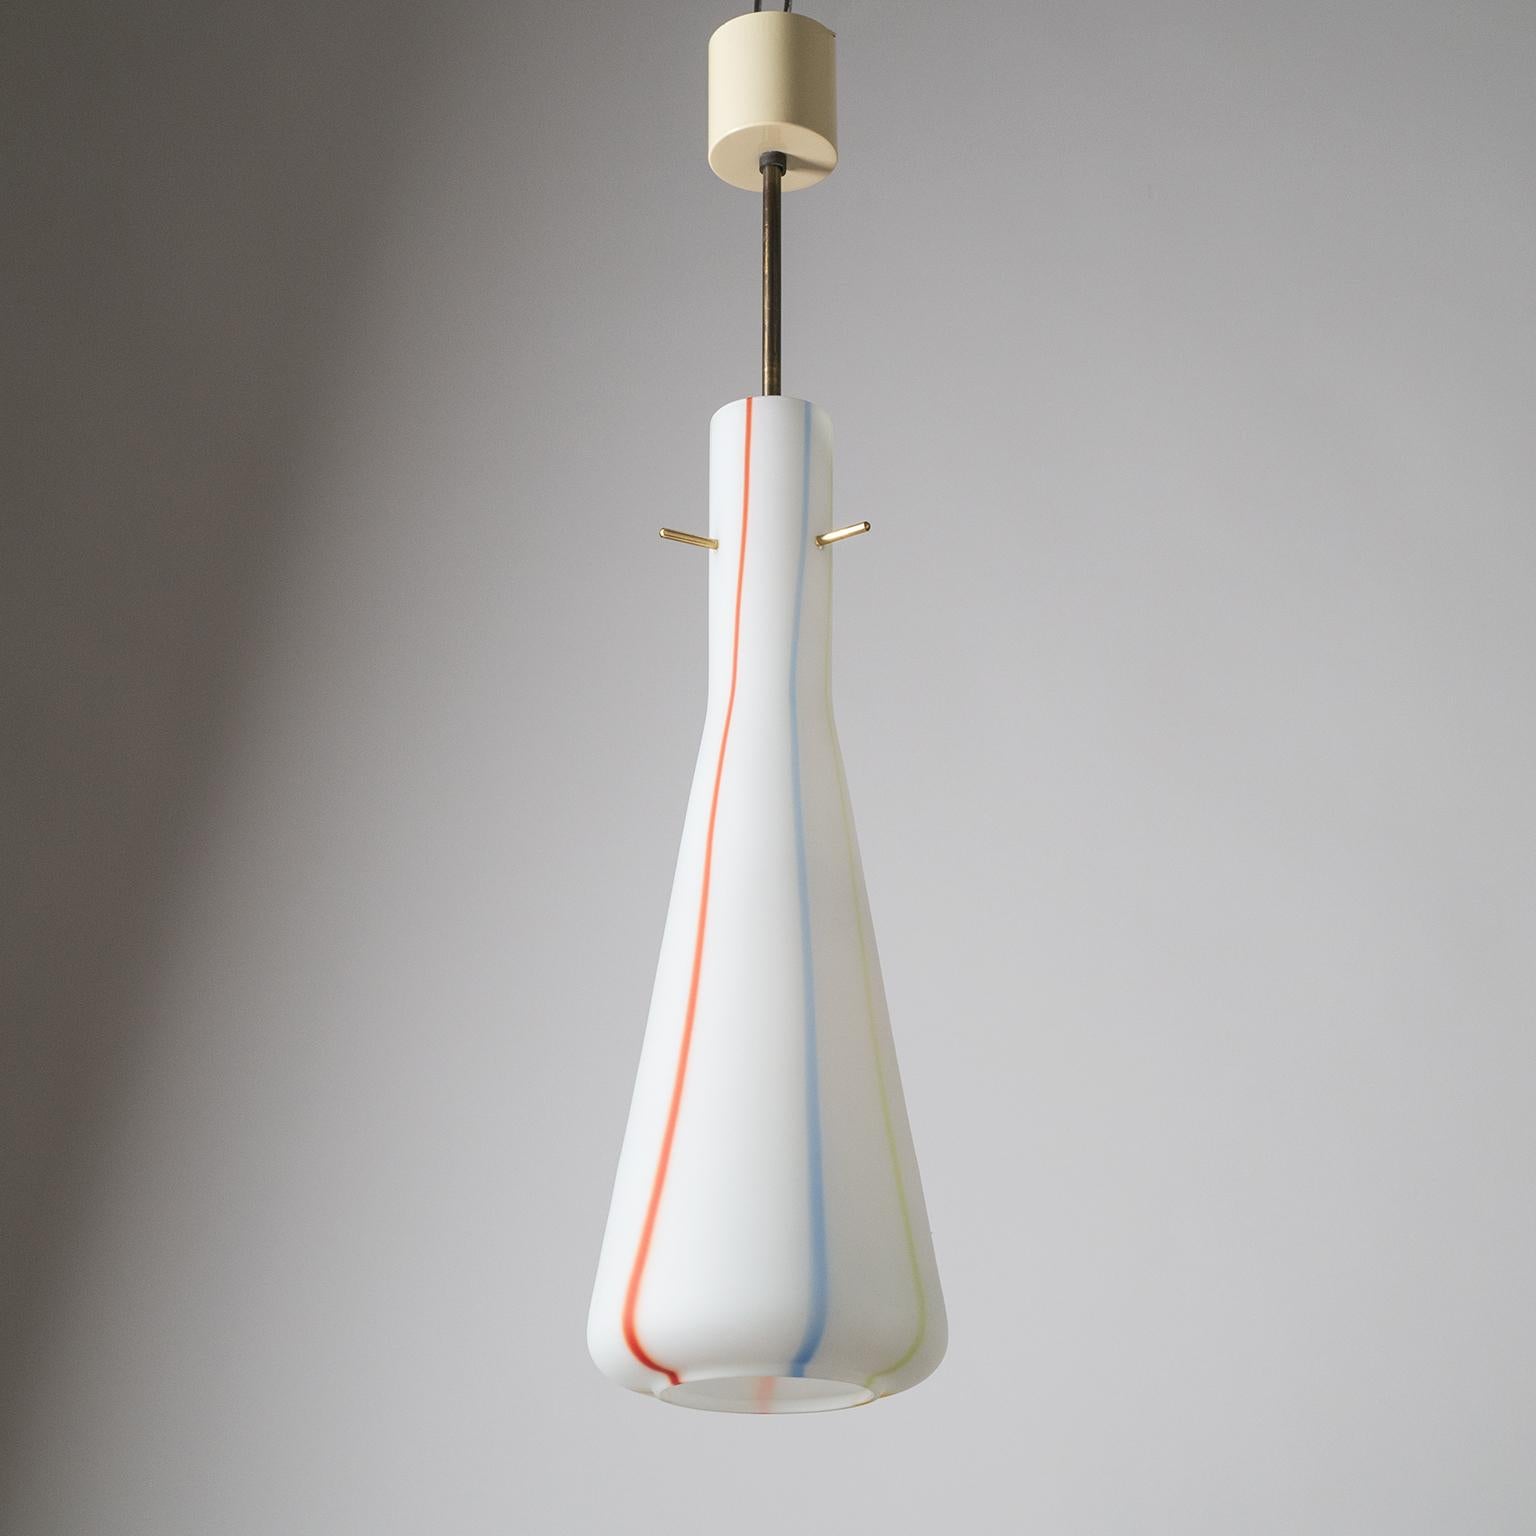 Tall murano glass ceiling light from the 1960s attributed to Vistosi. Long conical 'triplex opal' glass diffuser with colored glass stripes. Glass height is approximately 19inches/48cm. One brass and ceramic E27 socket with new wiring.